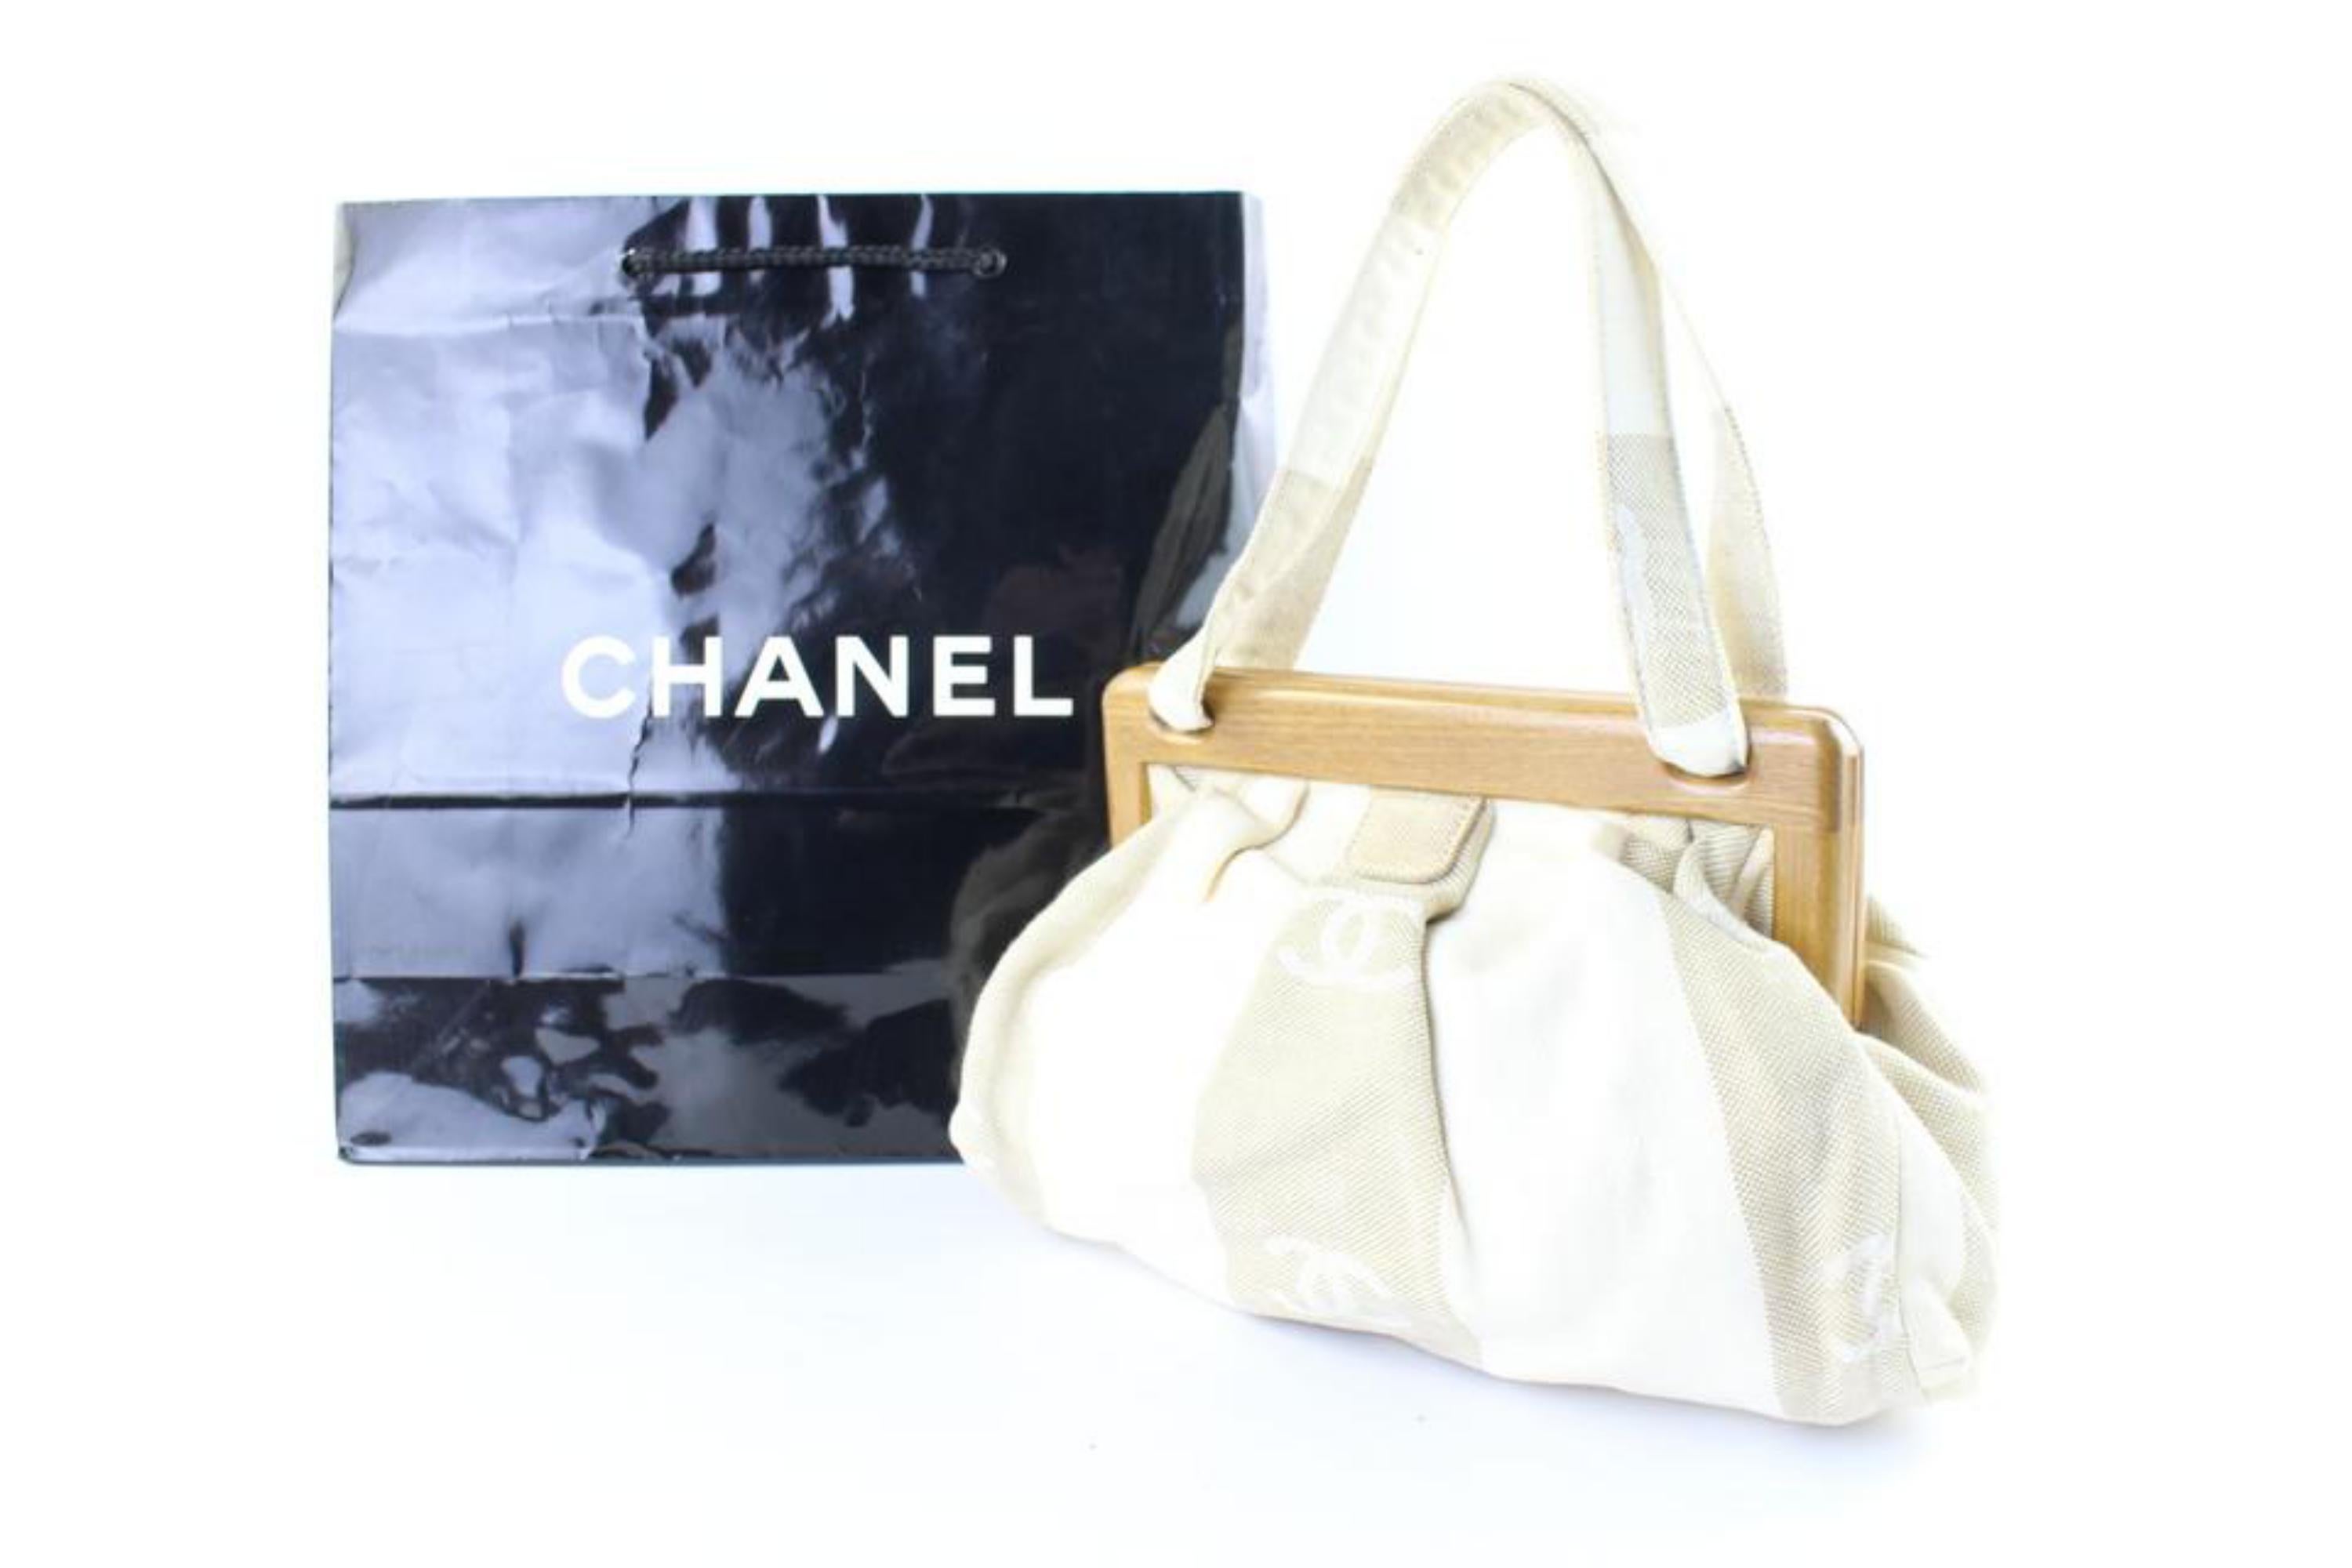 Chanel Clam - 3 For Sale on 1stDibs  chanel clam shell bag, chanel clam bag